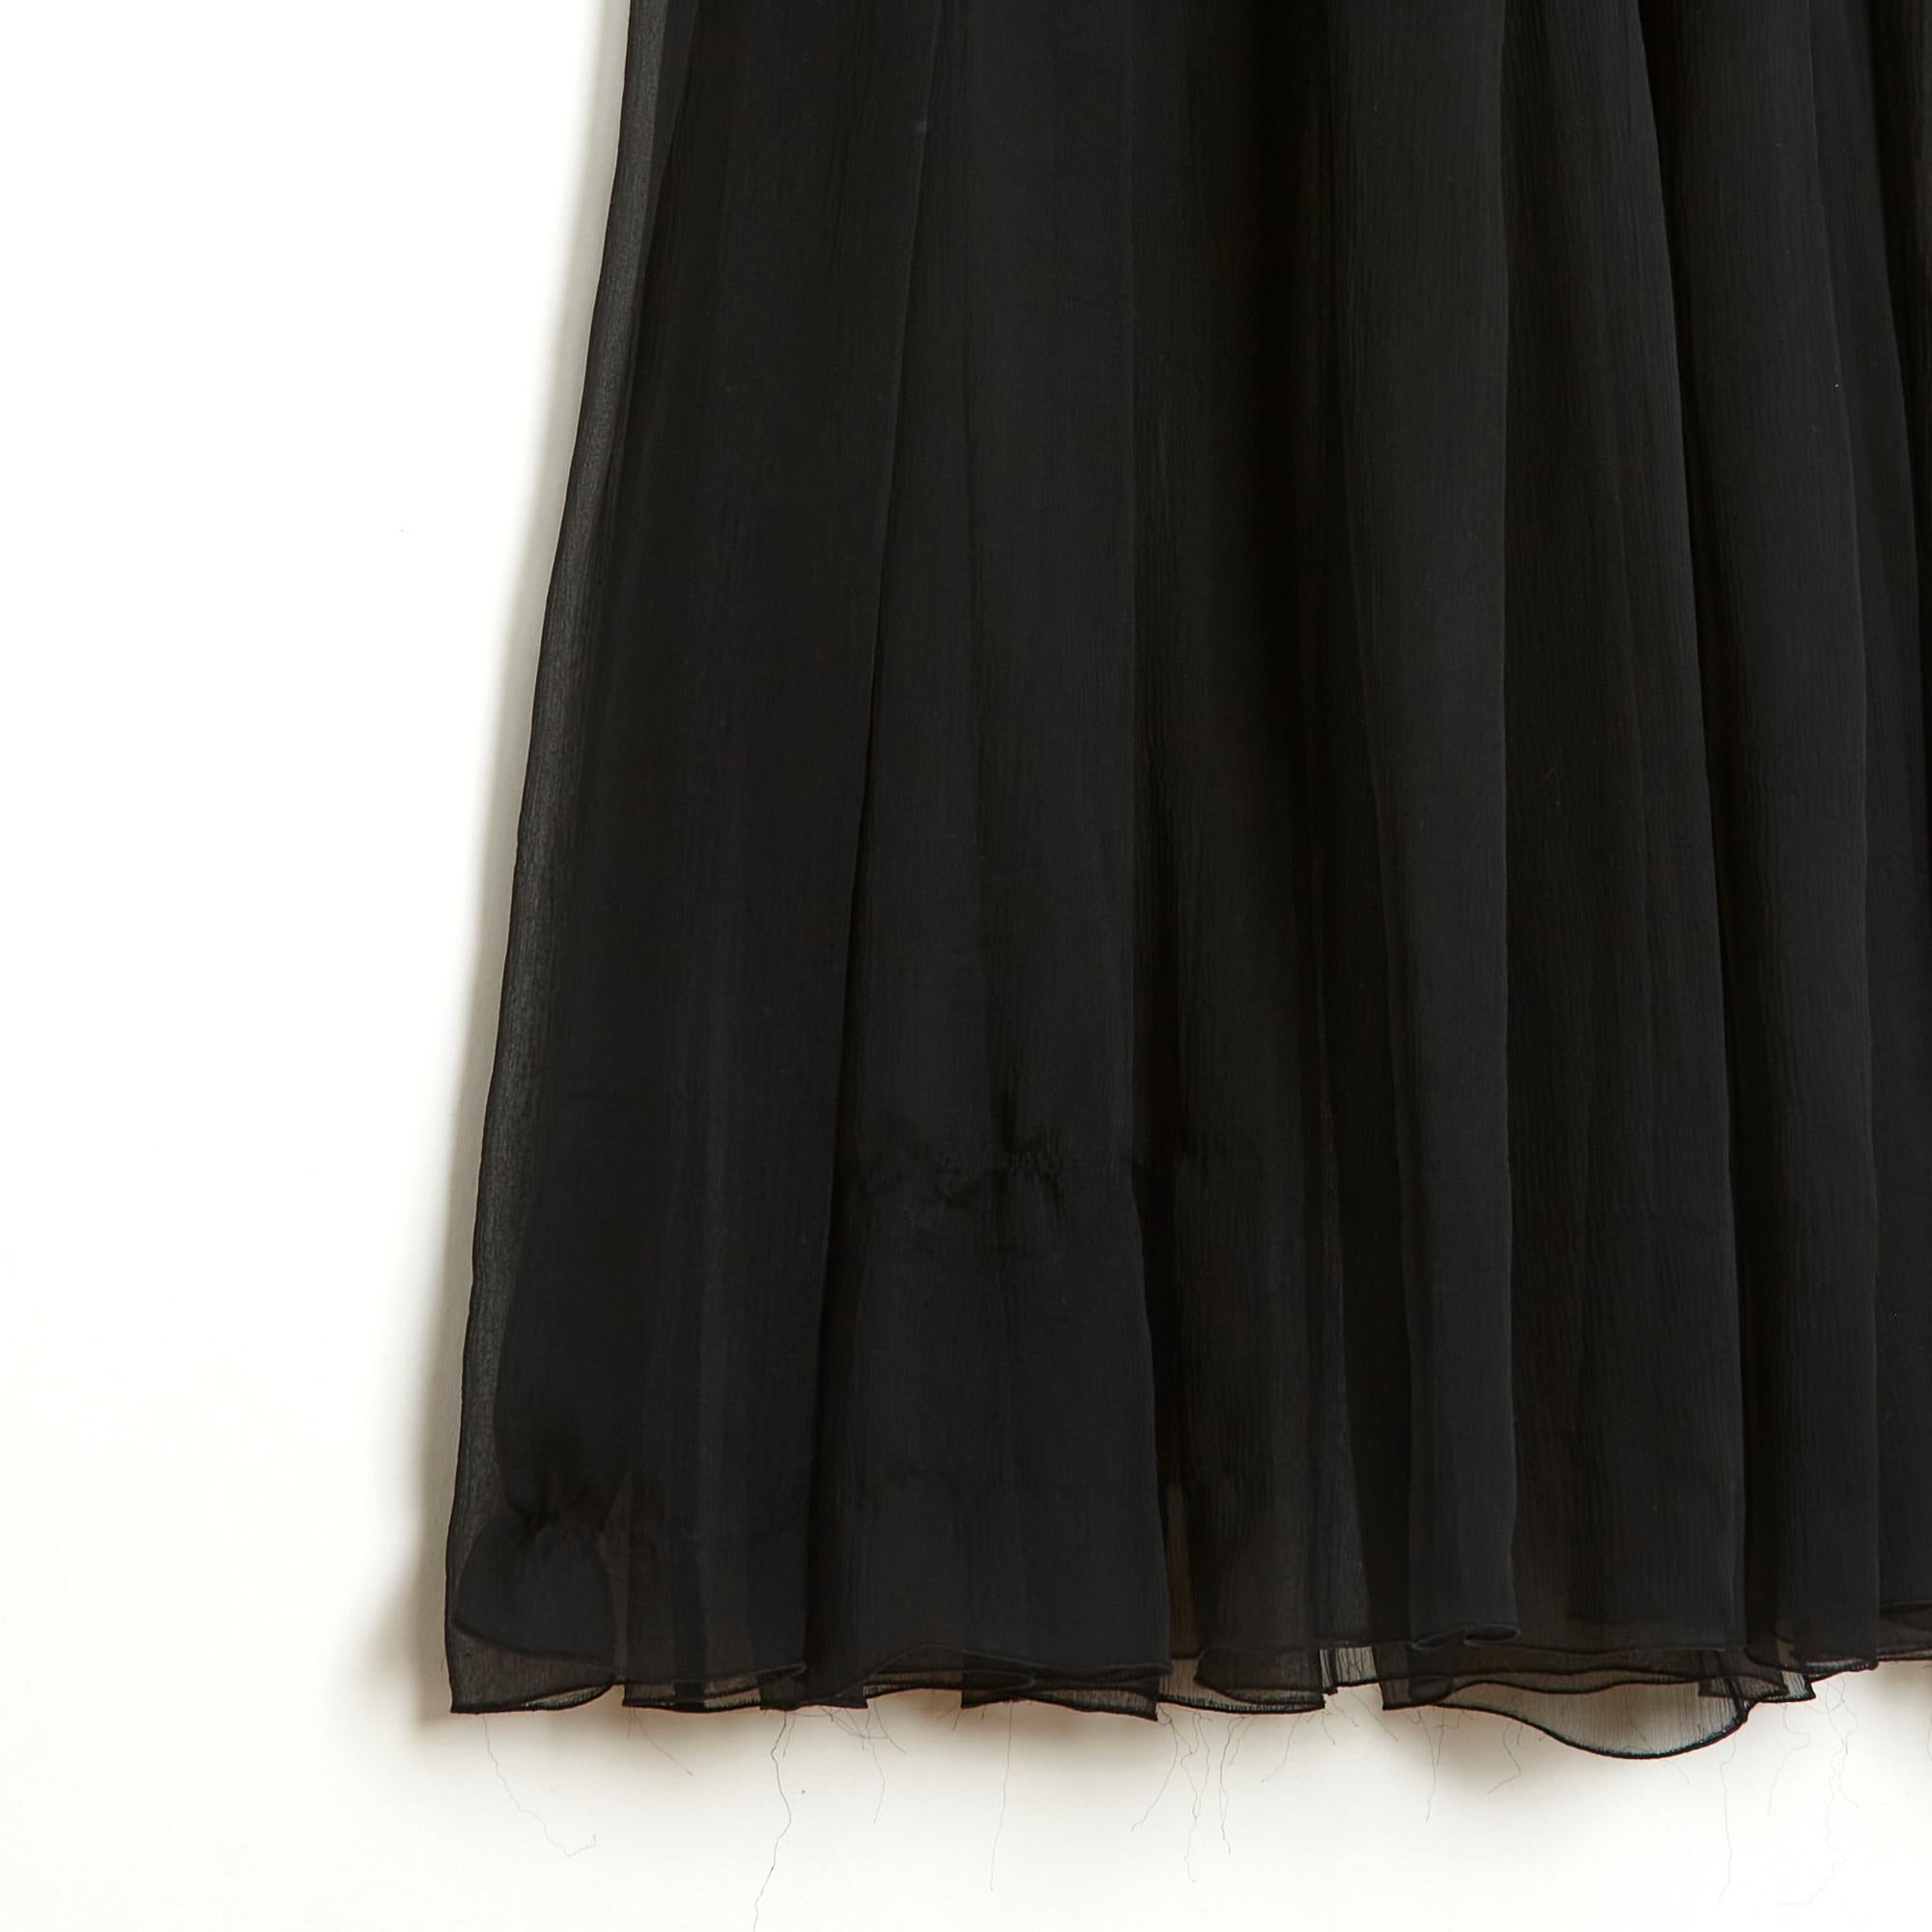 Chanel Haute Couture long skirt in silk chiffon, pleated to the knee, closed with a zip and hook. No composition or size label (Haute Couture requires) but the measurements indicate a 34FR: waist 32 cm, hips 45 cm, length 103 cm. The skirt is